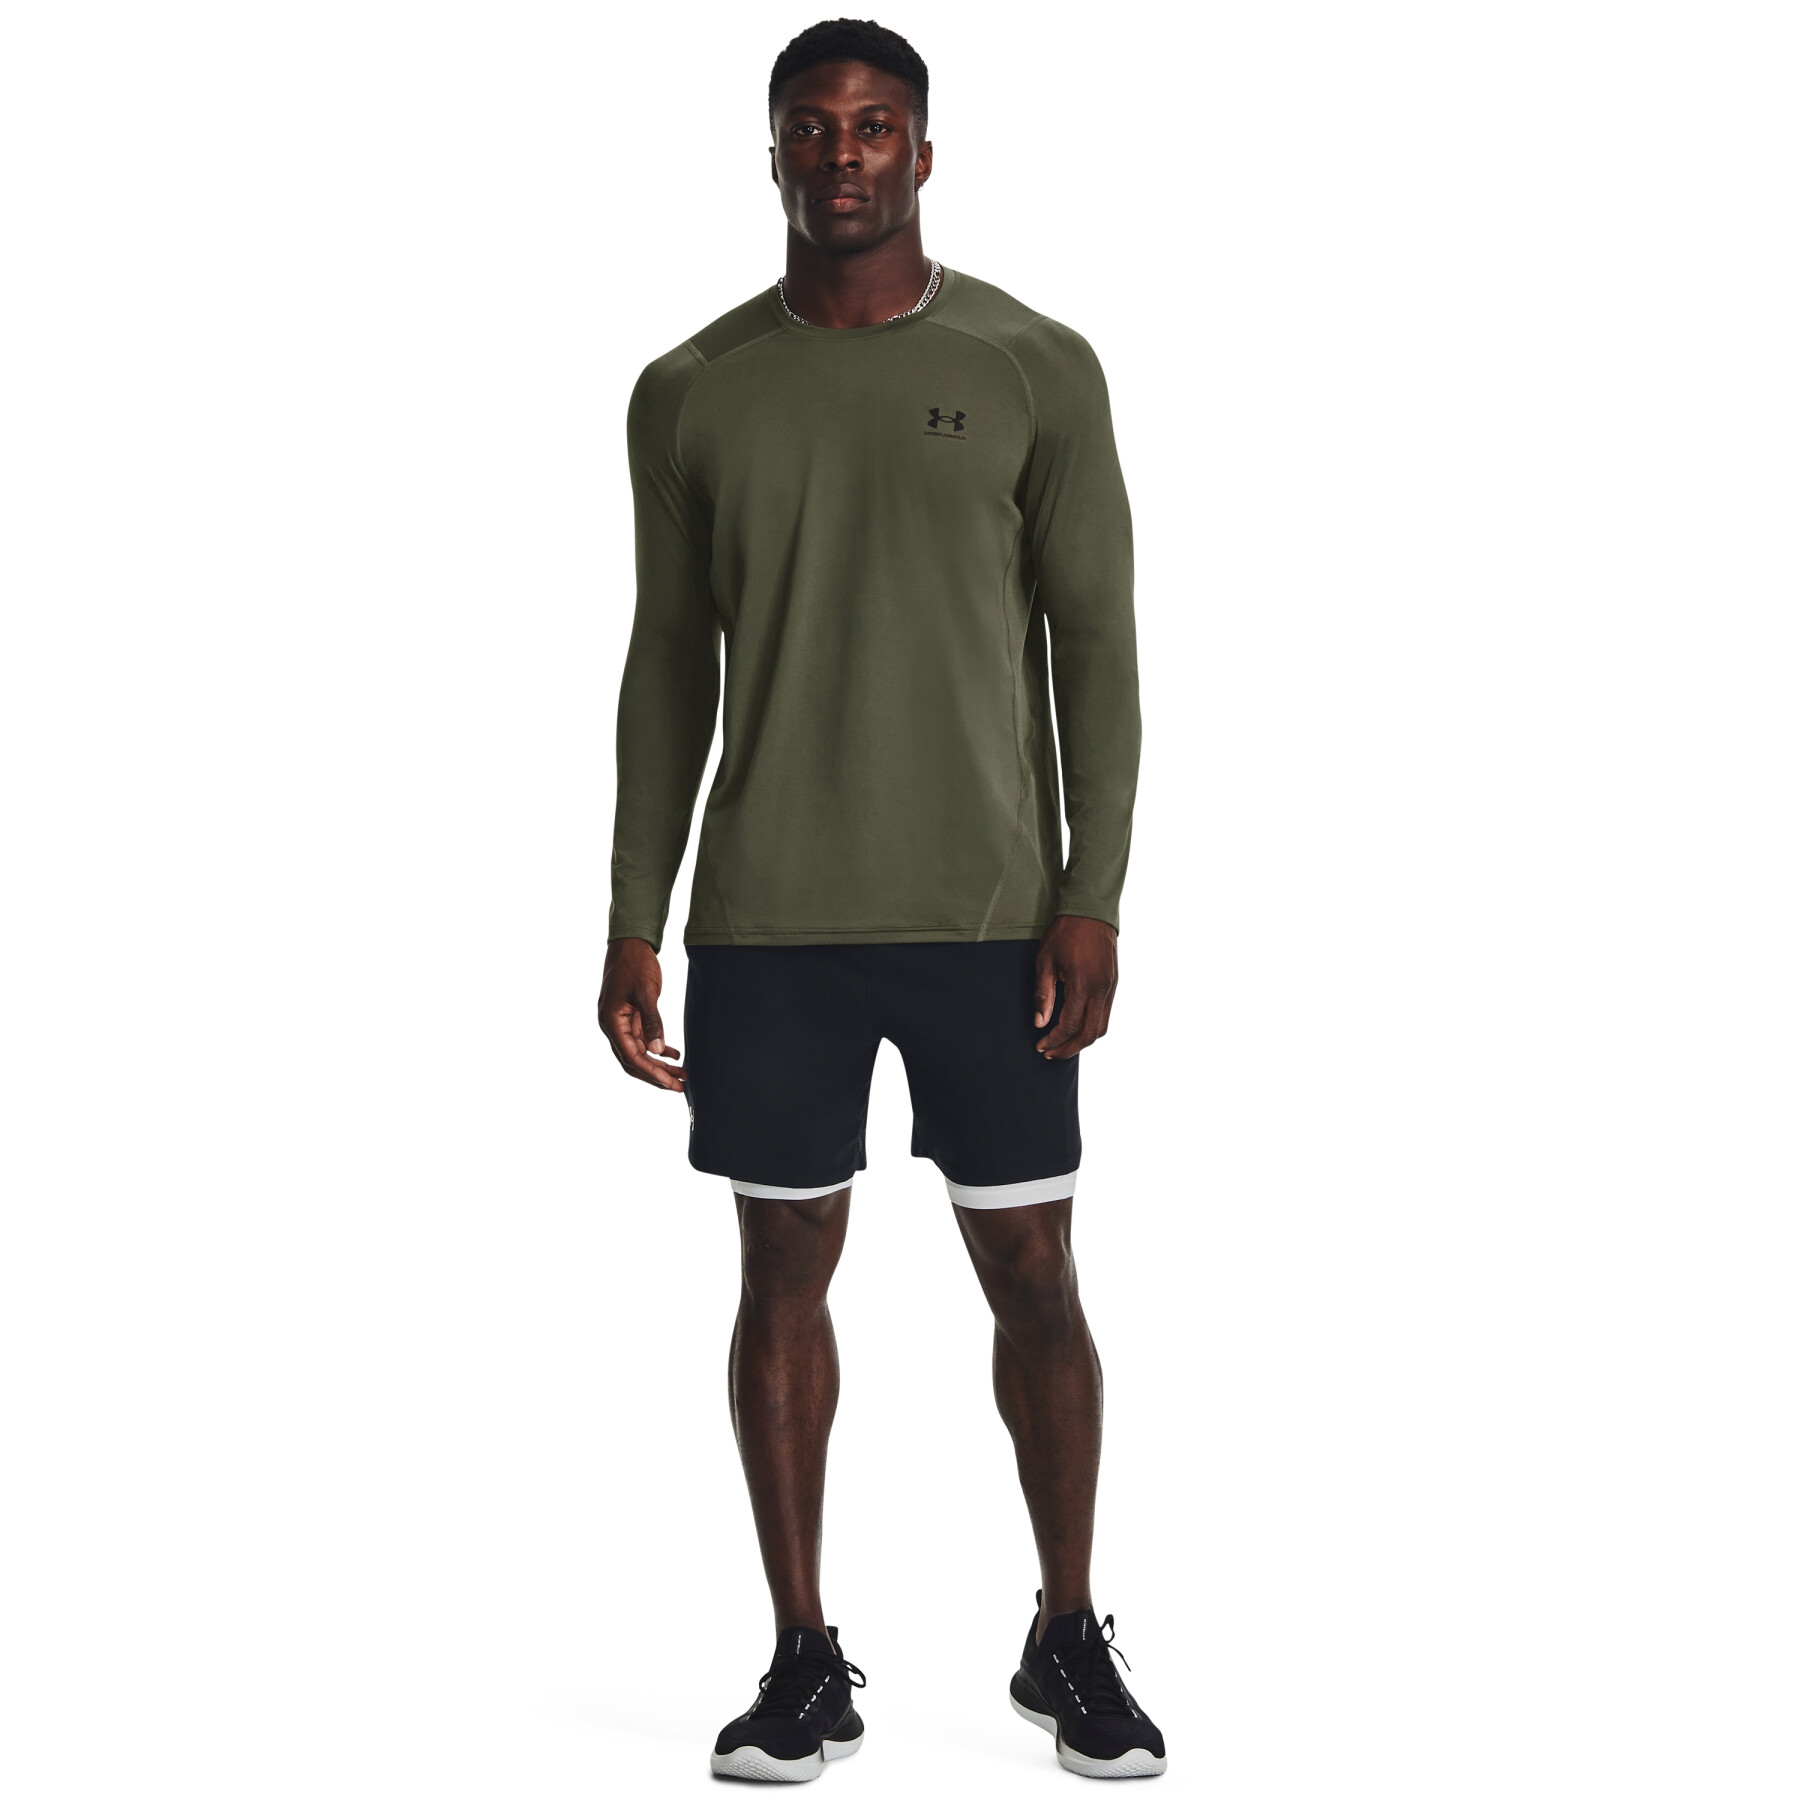 Fitted long-sleeve jersey Under Armour HeatGear